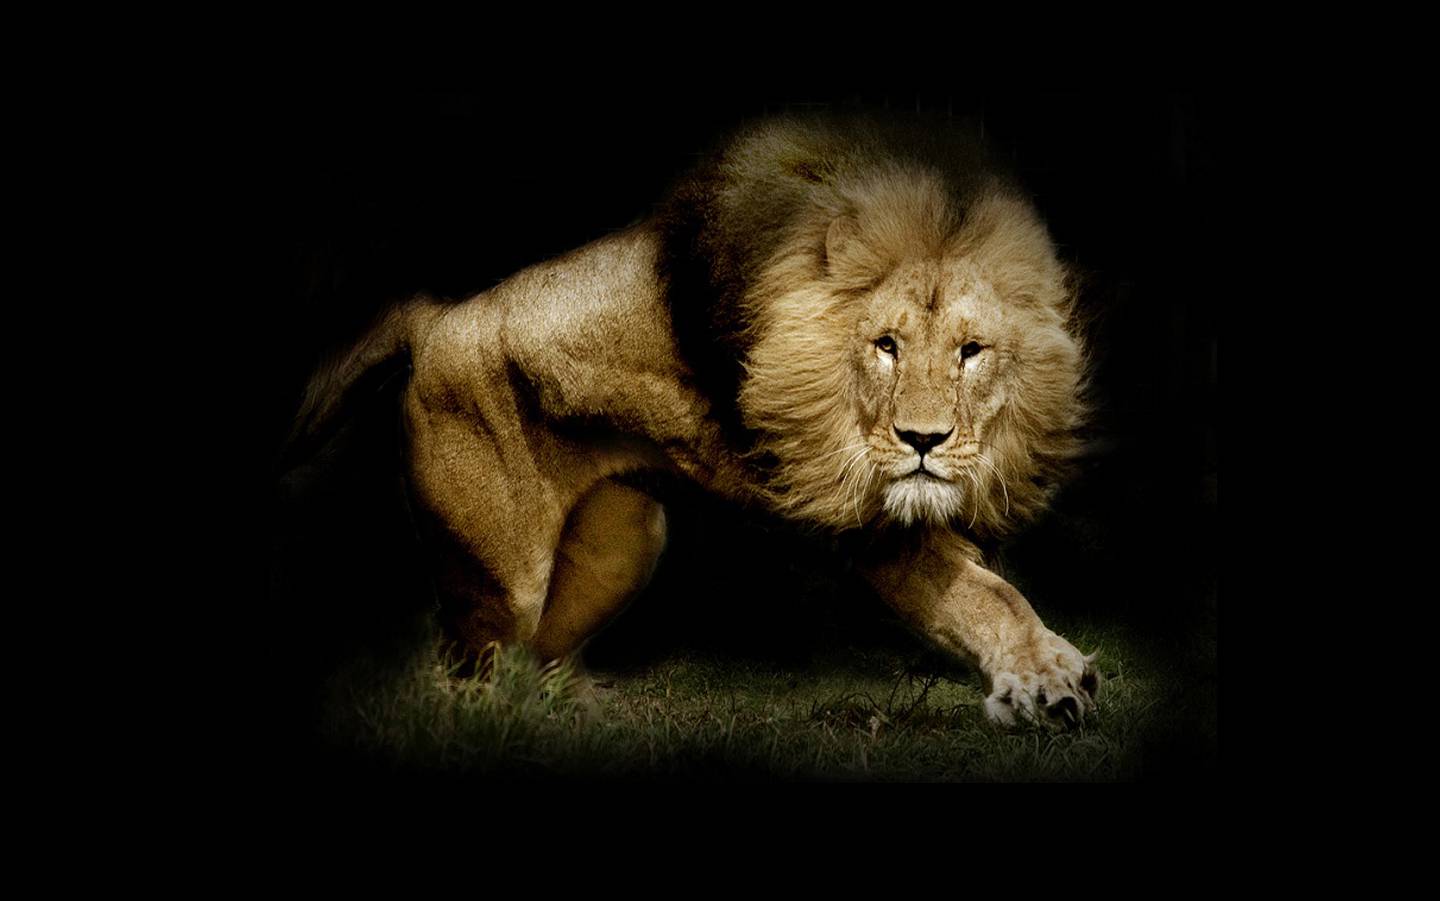 Under The Lion Wallpaper Category Of HD Lions Mobile